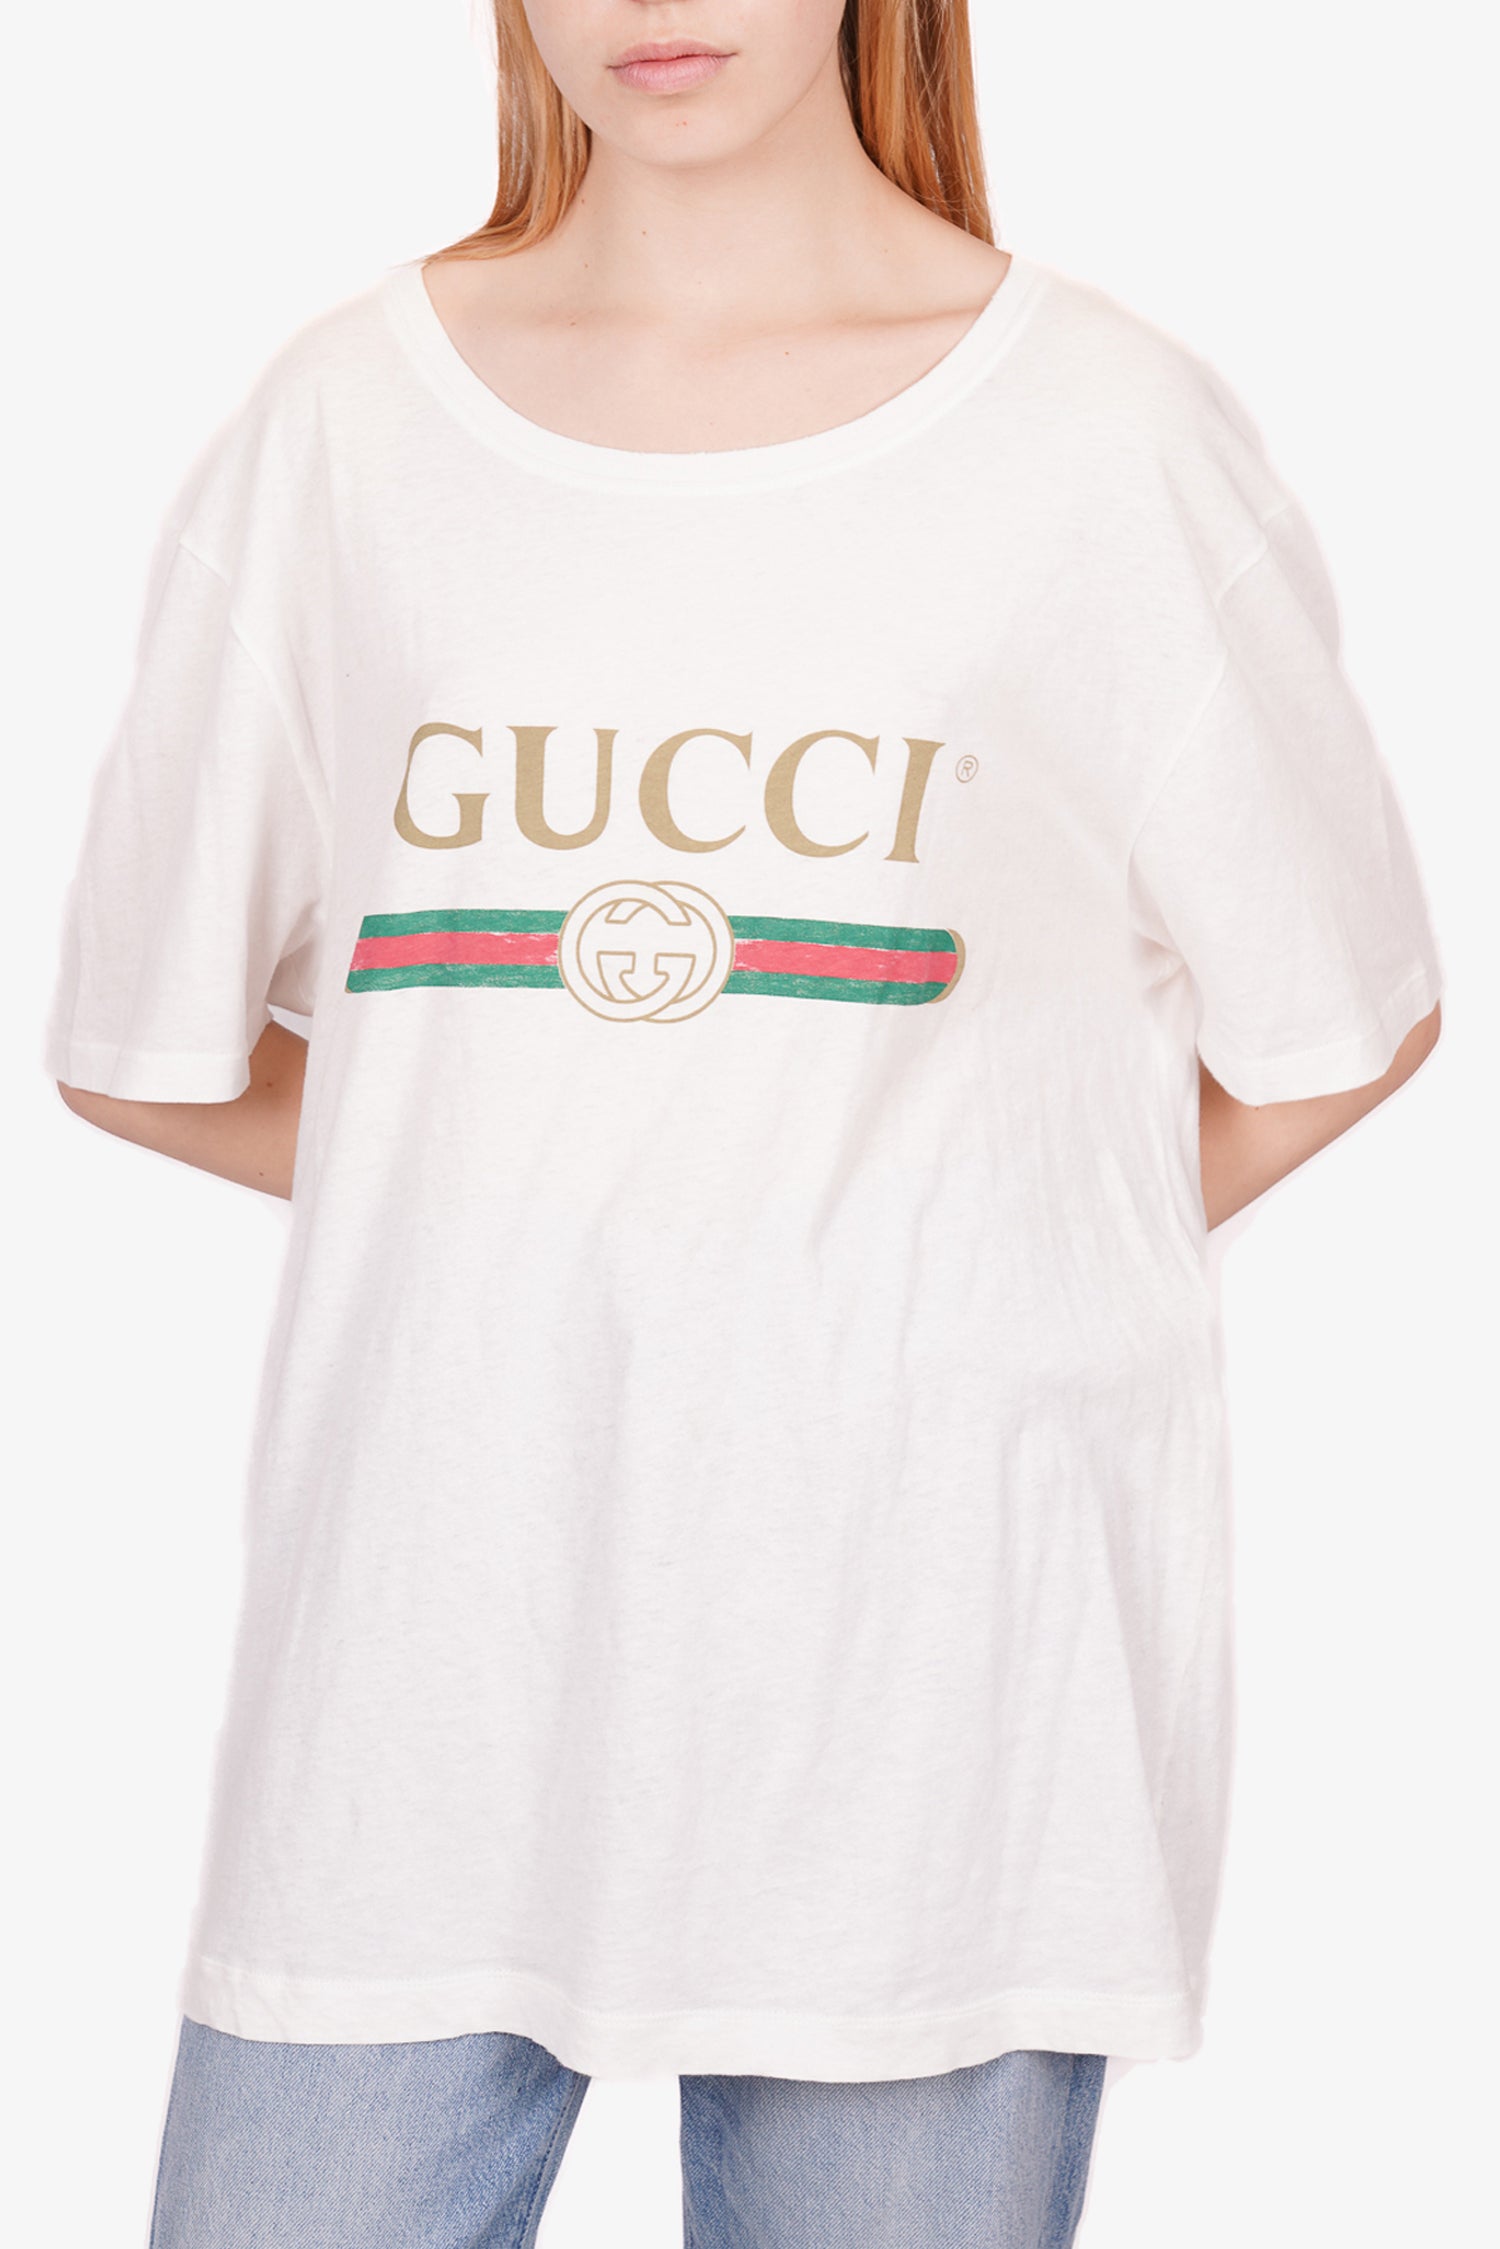 Gucci White Thin Jersey Logo T-Shirt Size L – Mine & Yours